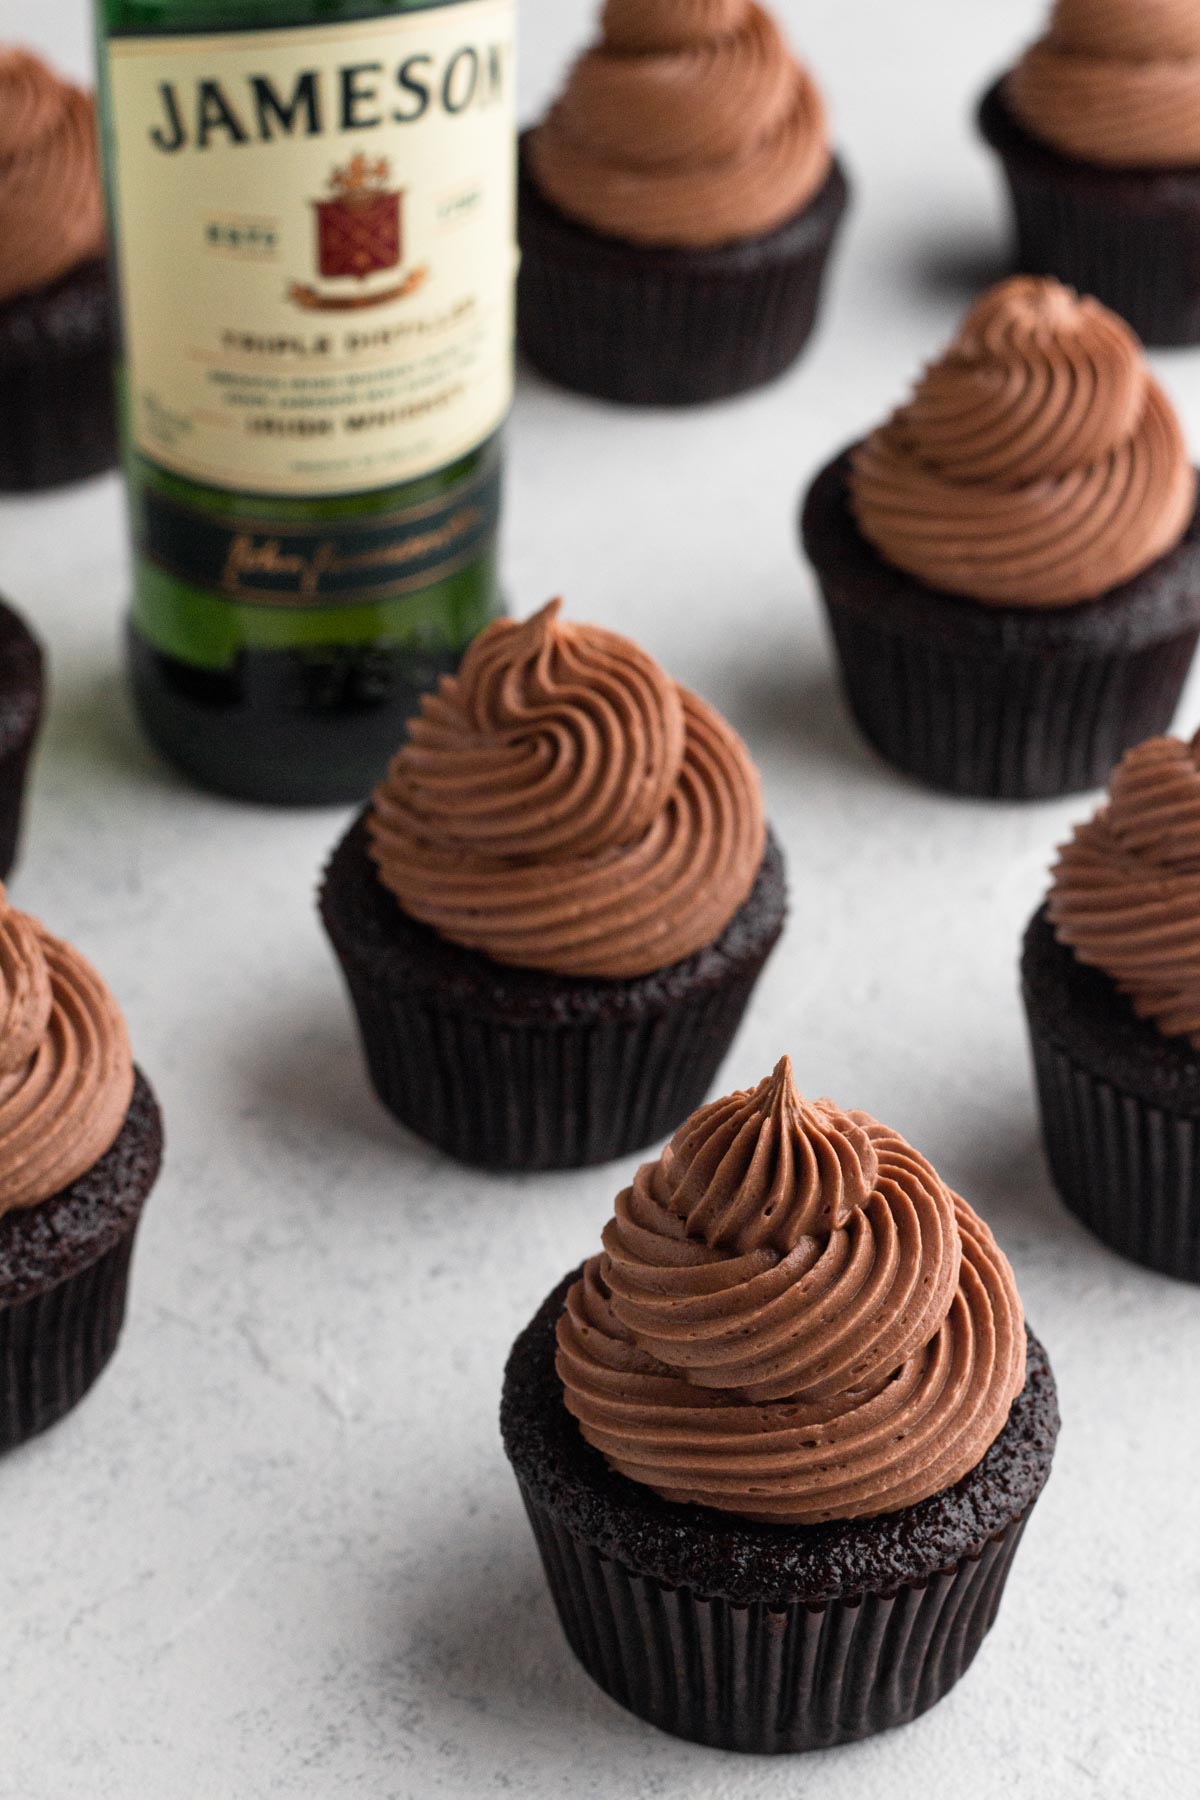 Chocolate cupcakes topped with swirls of chocolate frosting surrounding a bottle of Jameson Irish whiskey.